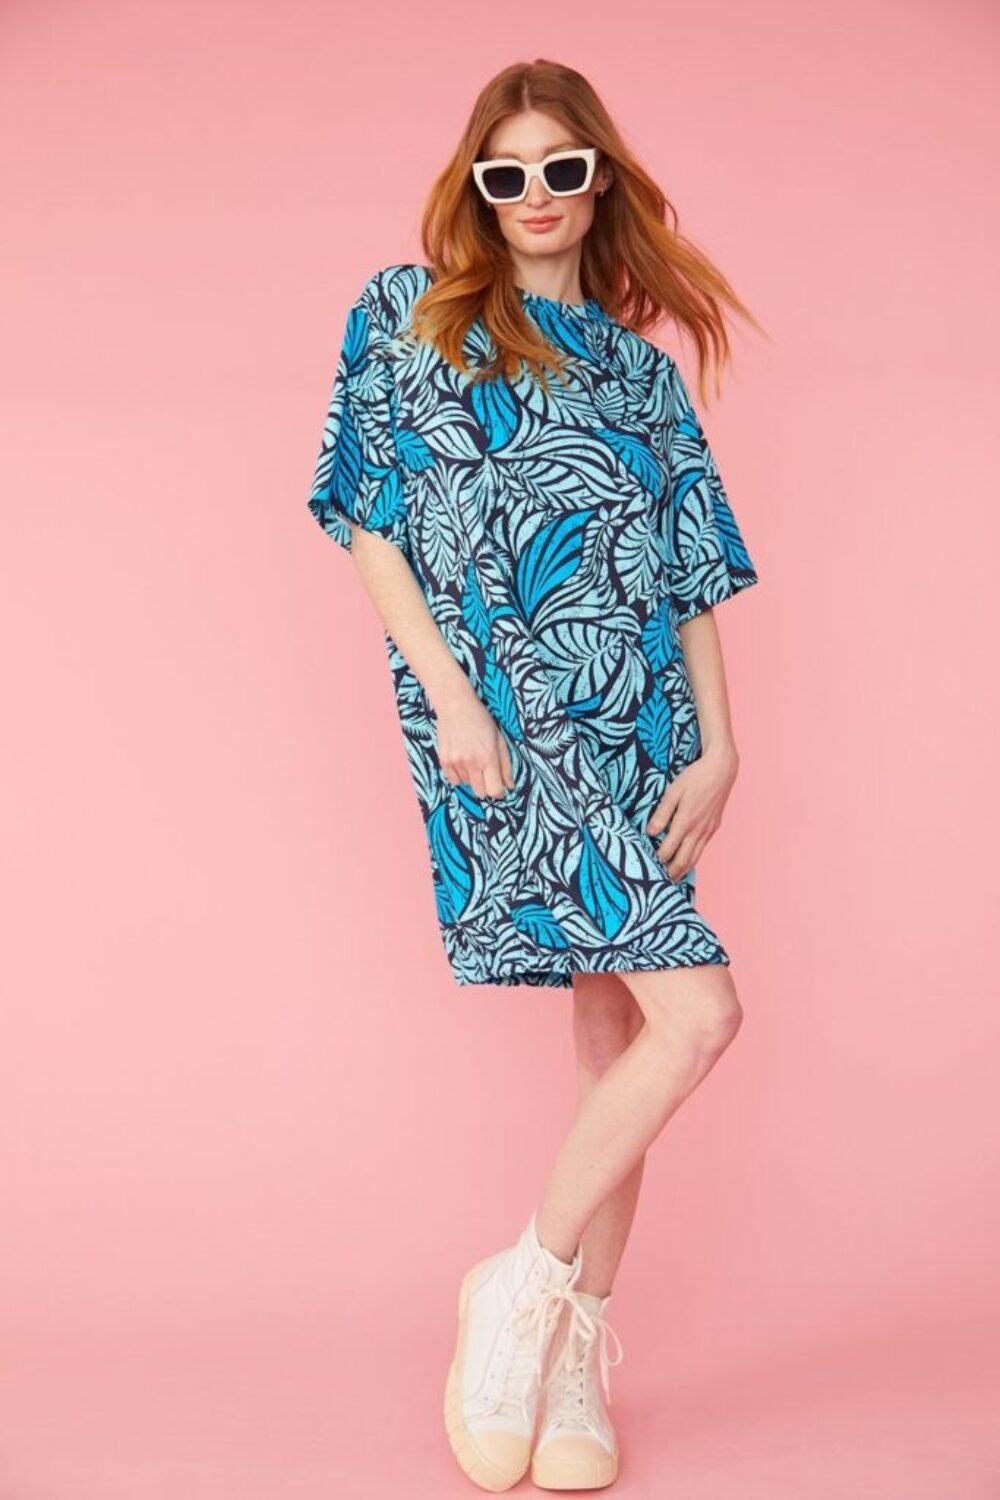 Shop Lux Tropical Print Scuba Dress and women's luxury and designer clothes at www.lux-apparel.co.uk